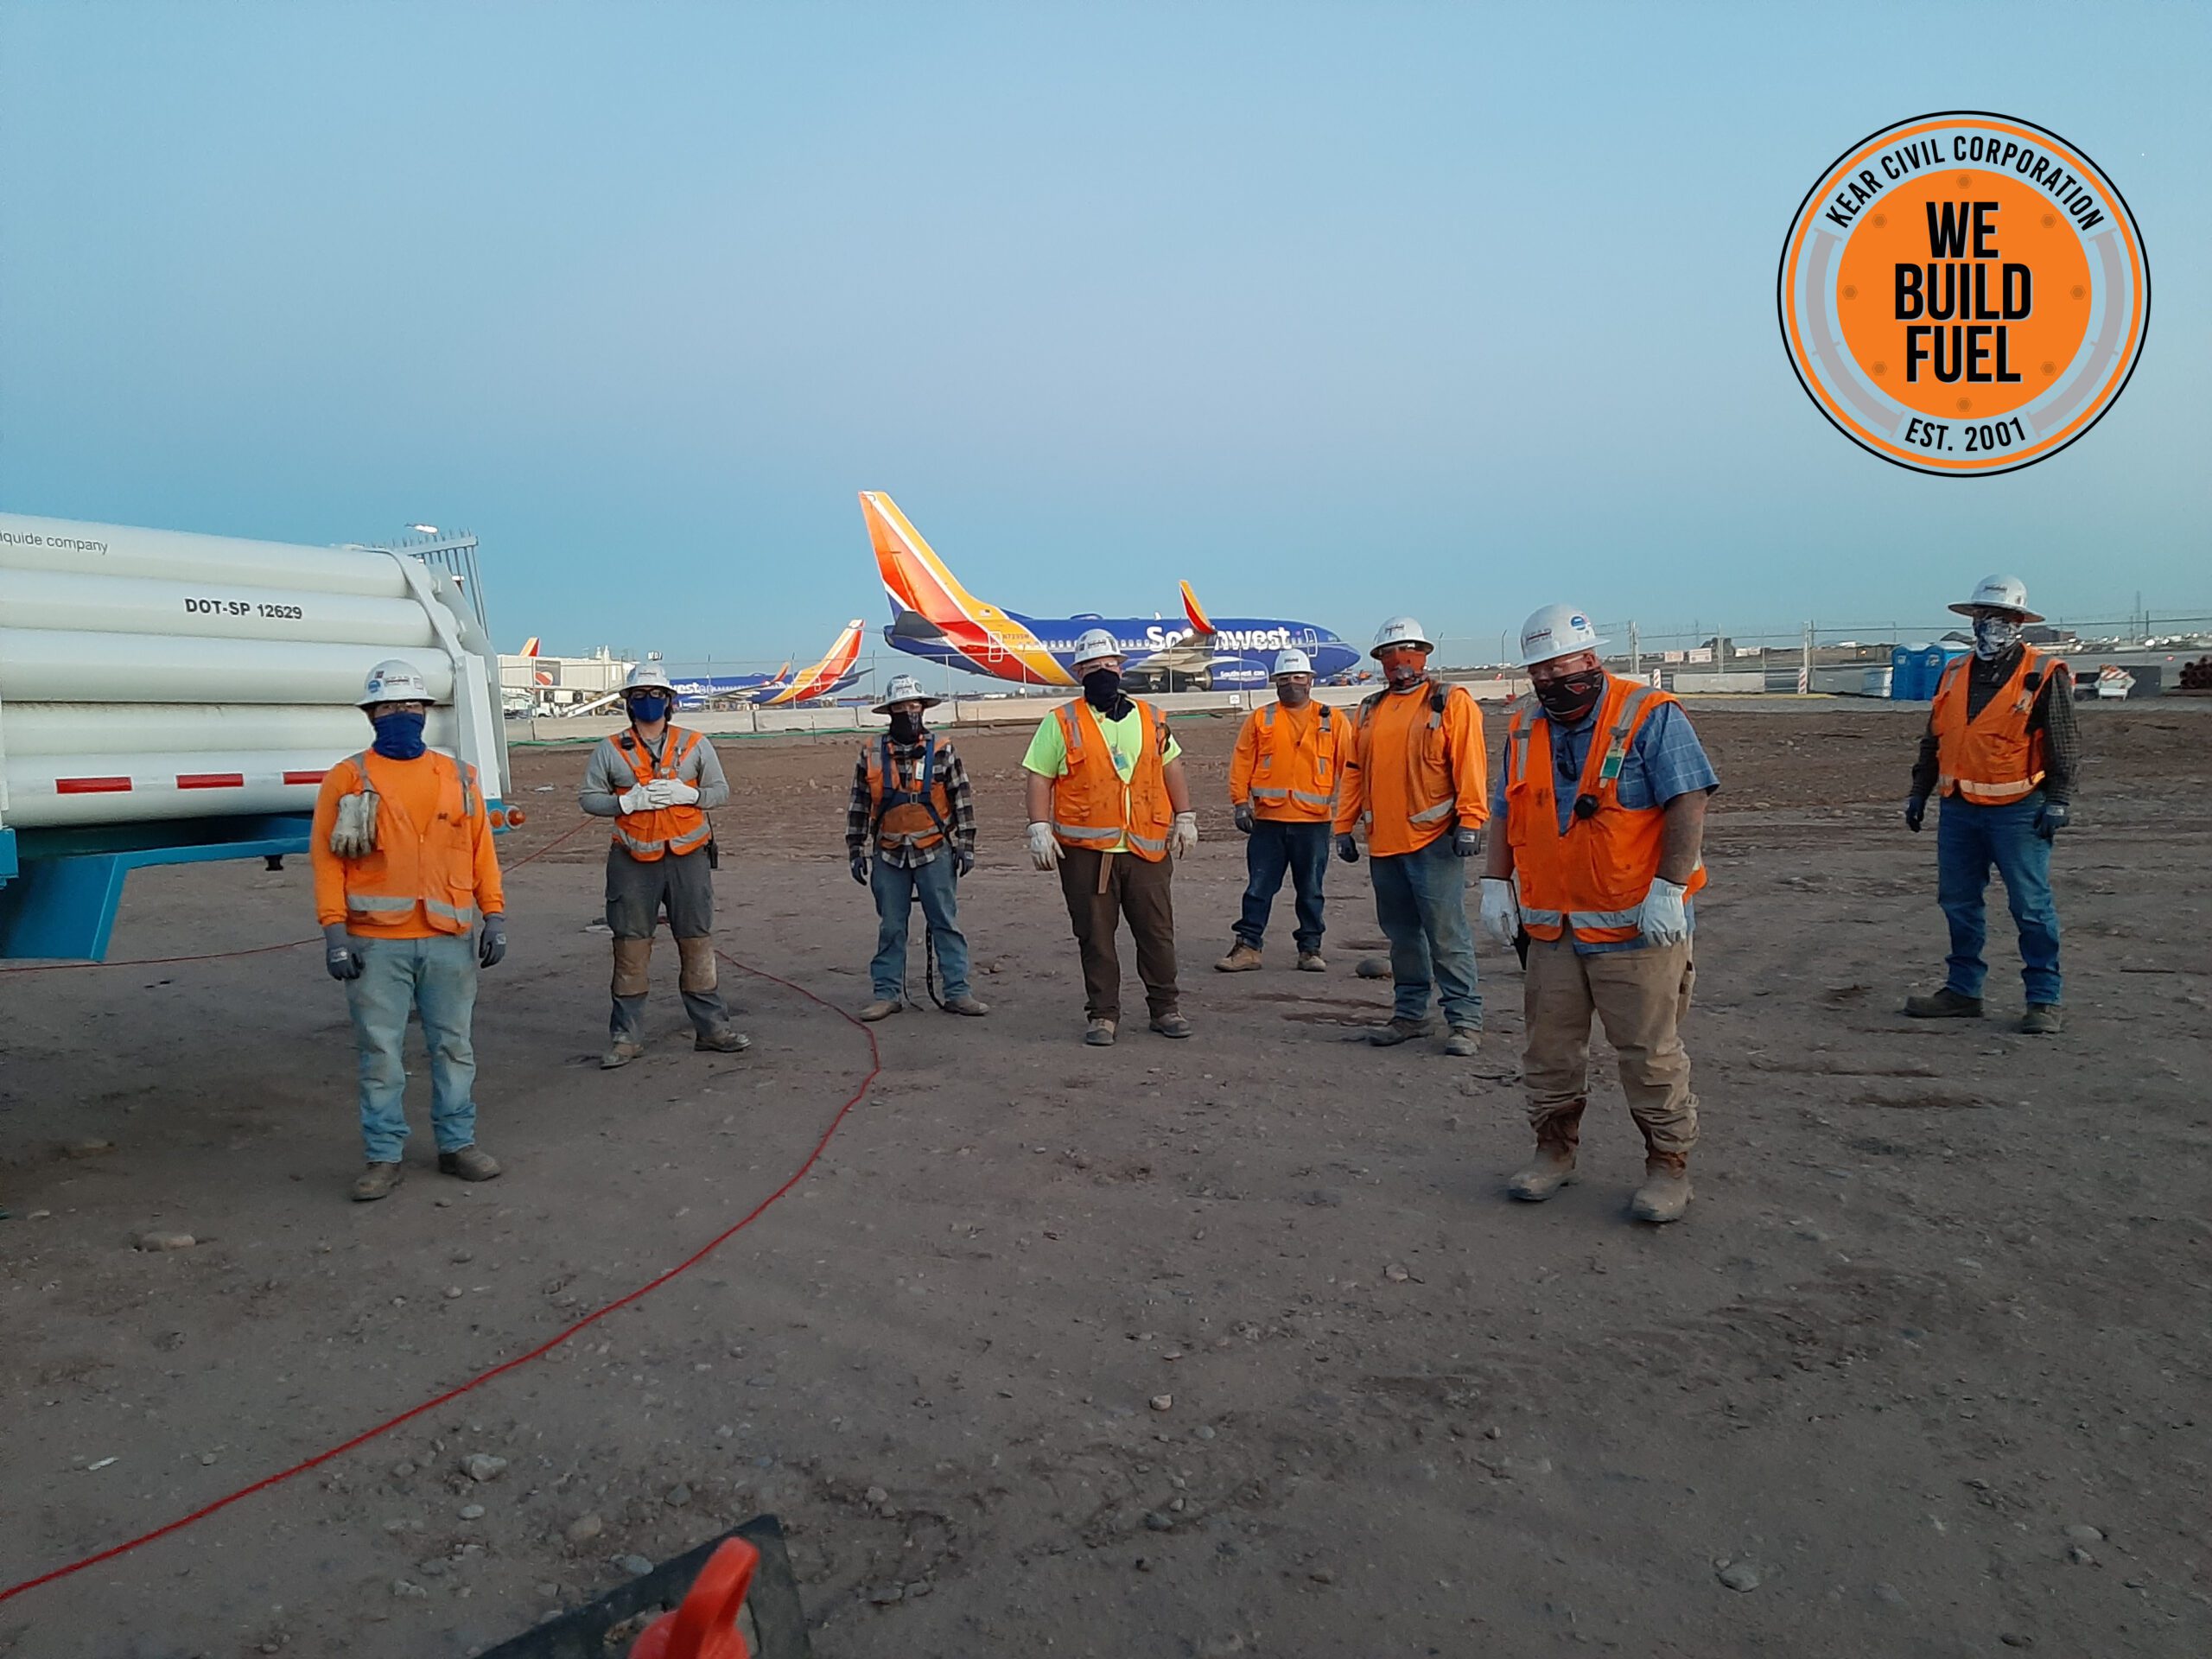 A group of construction workers in high-visibility vests and hard hats standing at a worksite with a truck and airplane in the background, building a new home.